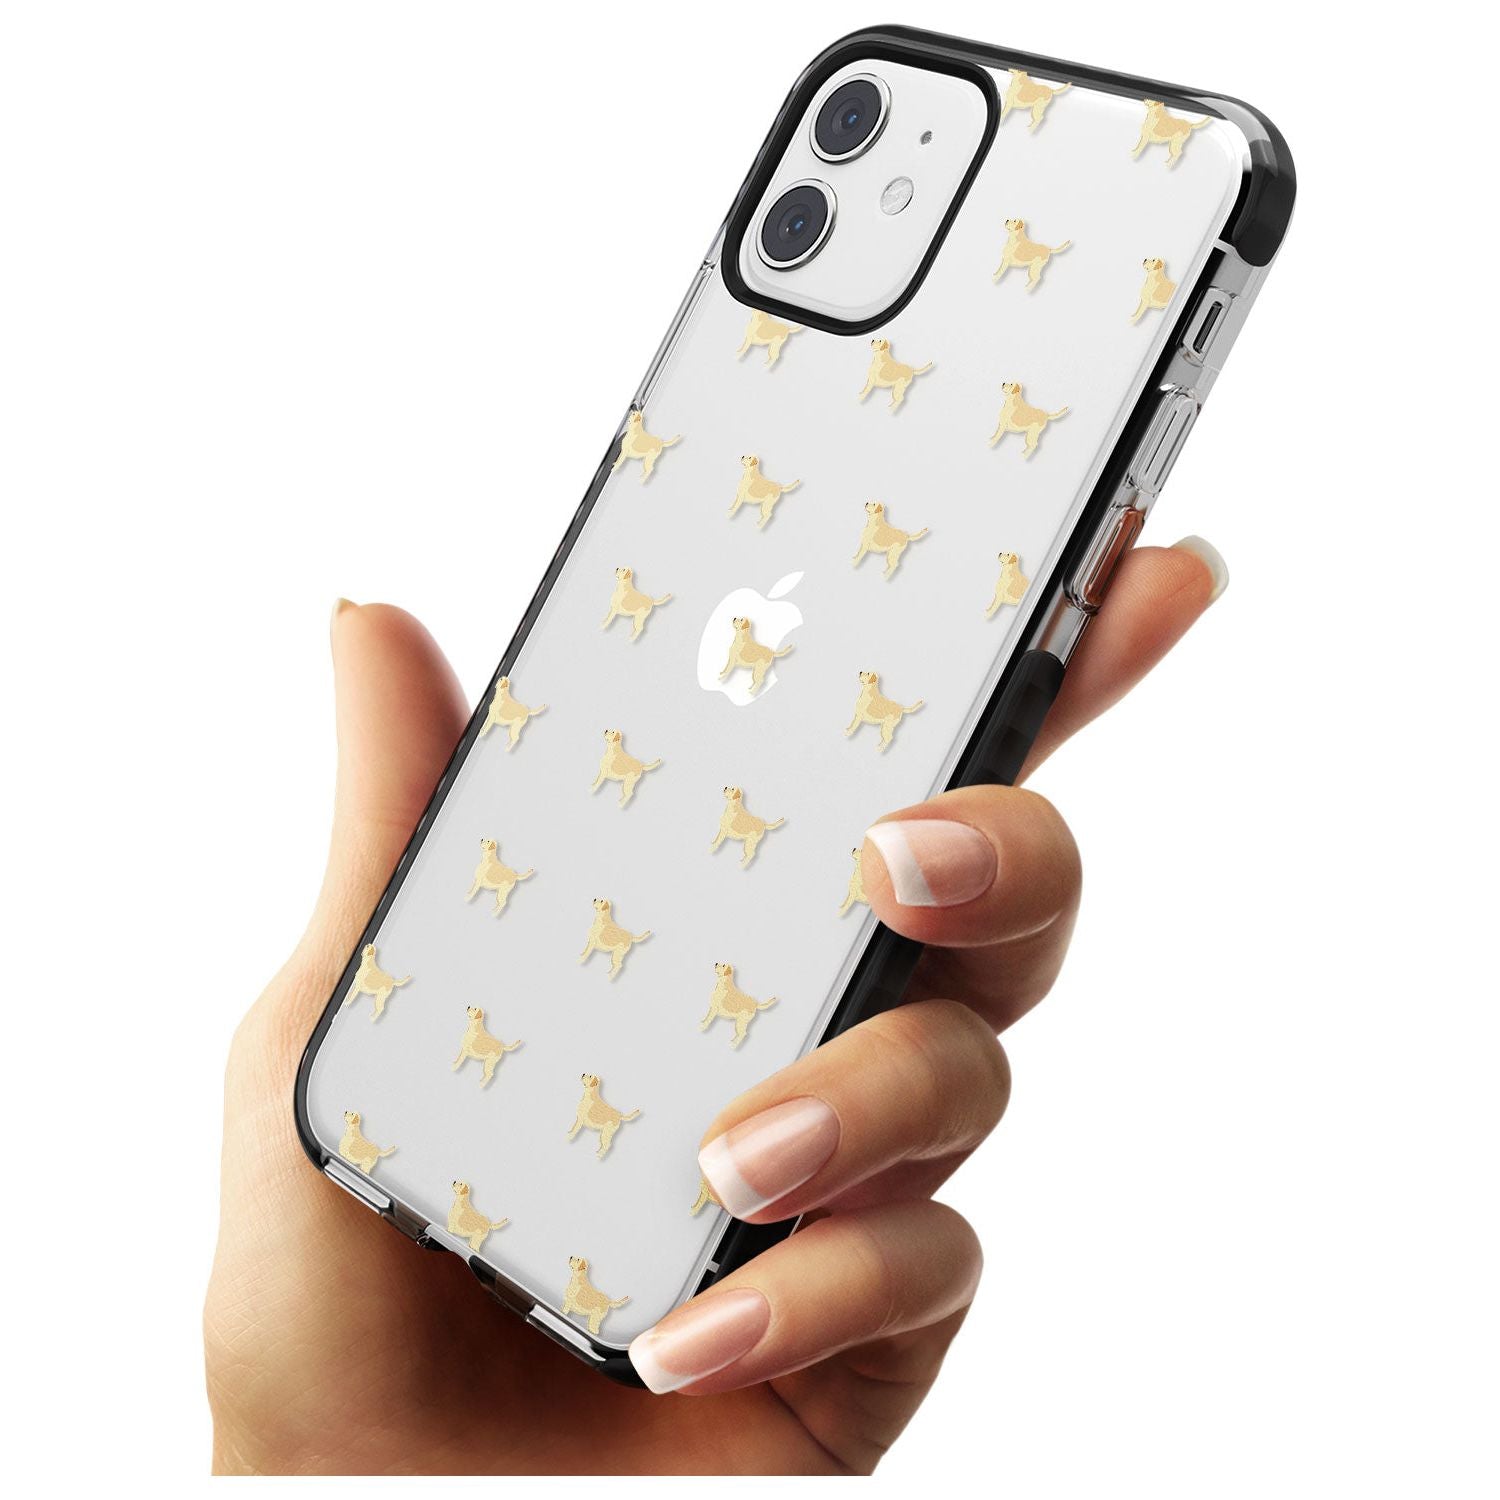 Tan Labrador Dog Pattern Clear Black Impact Phone Case for iPhone 11